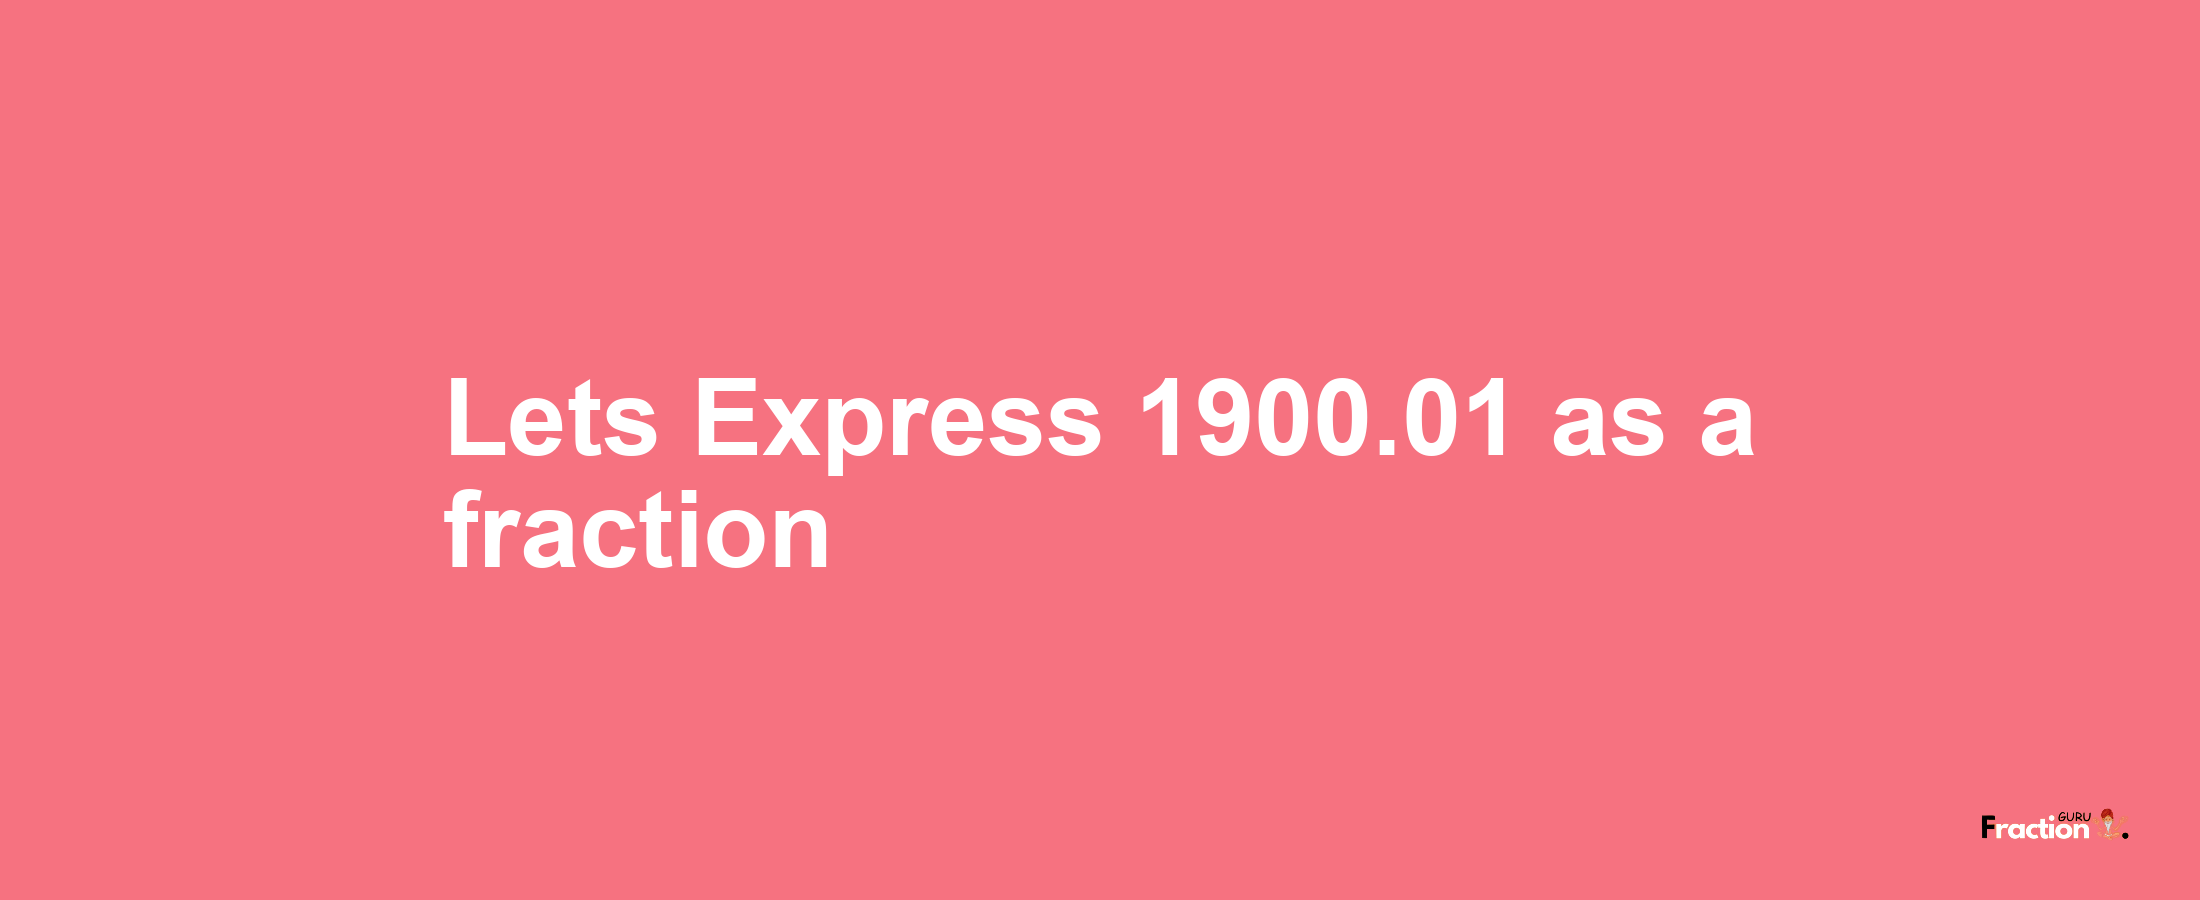 Lets Express 1900.01 as afraction